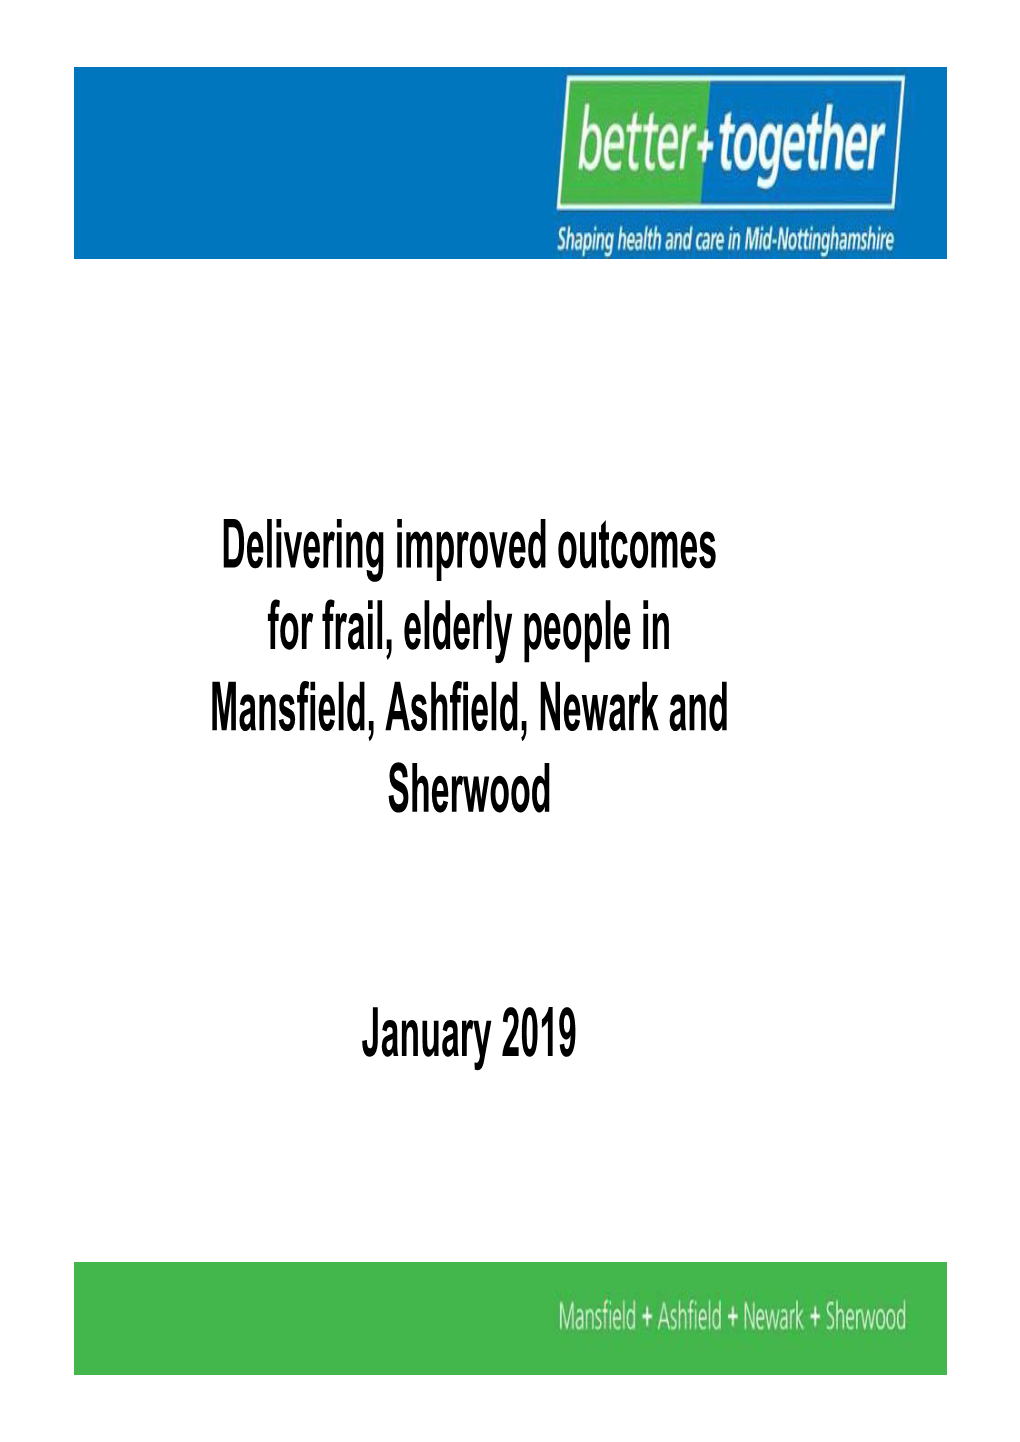 Delivering Improved Outcomes for Frail, Elderly People in Mansfield, Ashfield, Newark and Sherwood January 2019